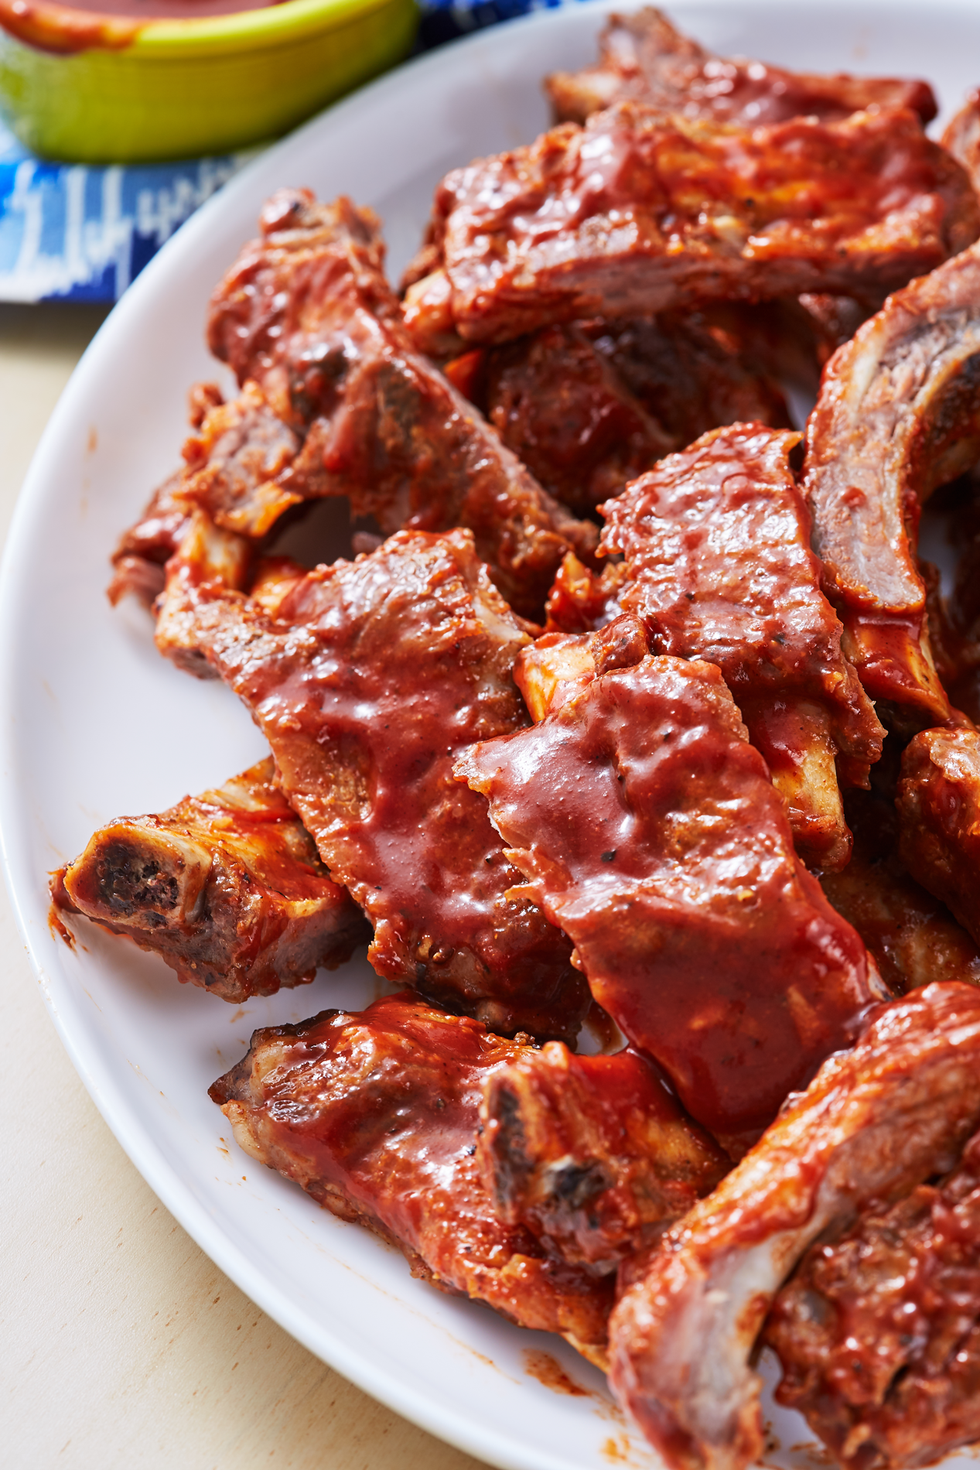 https://hips.hearstapps.com/hmg-prod/images/190404-instant-pot-ribs-vertical-1-1555018110.png?crop=0.9997369113391213xw:1xh;center,top&resize=980:*